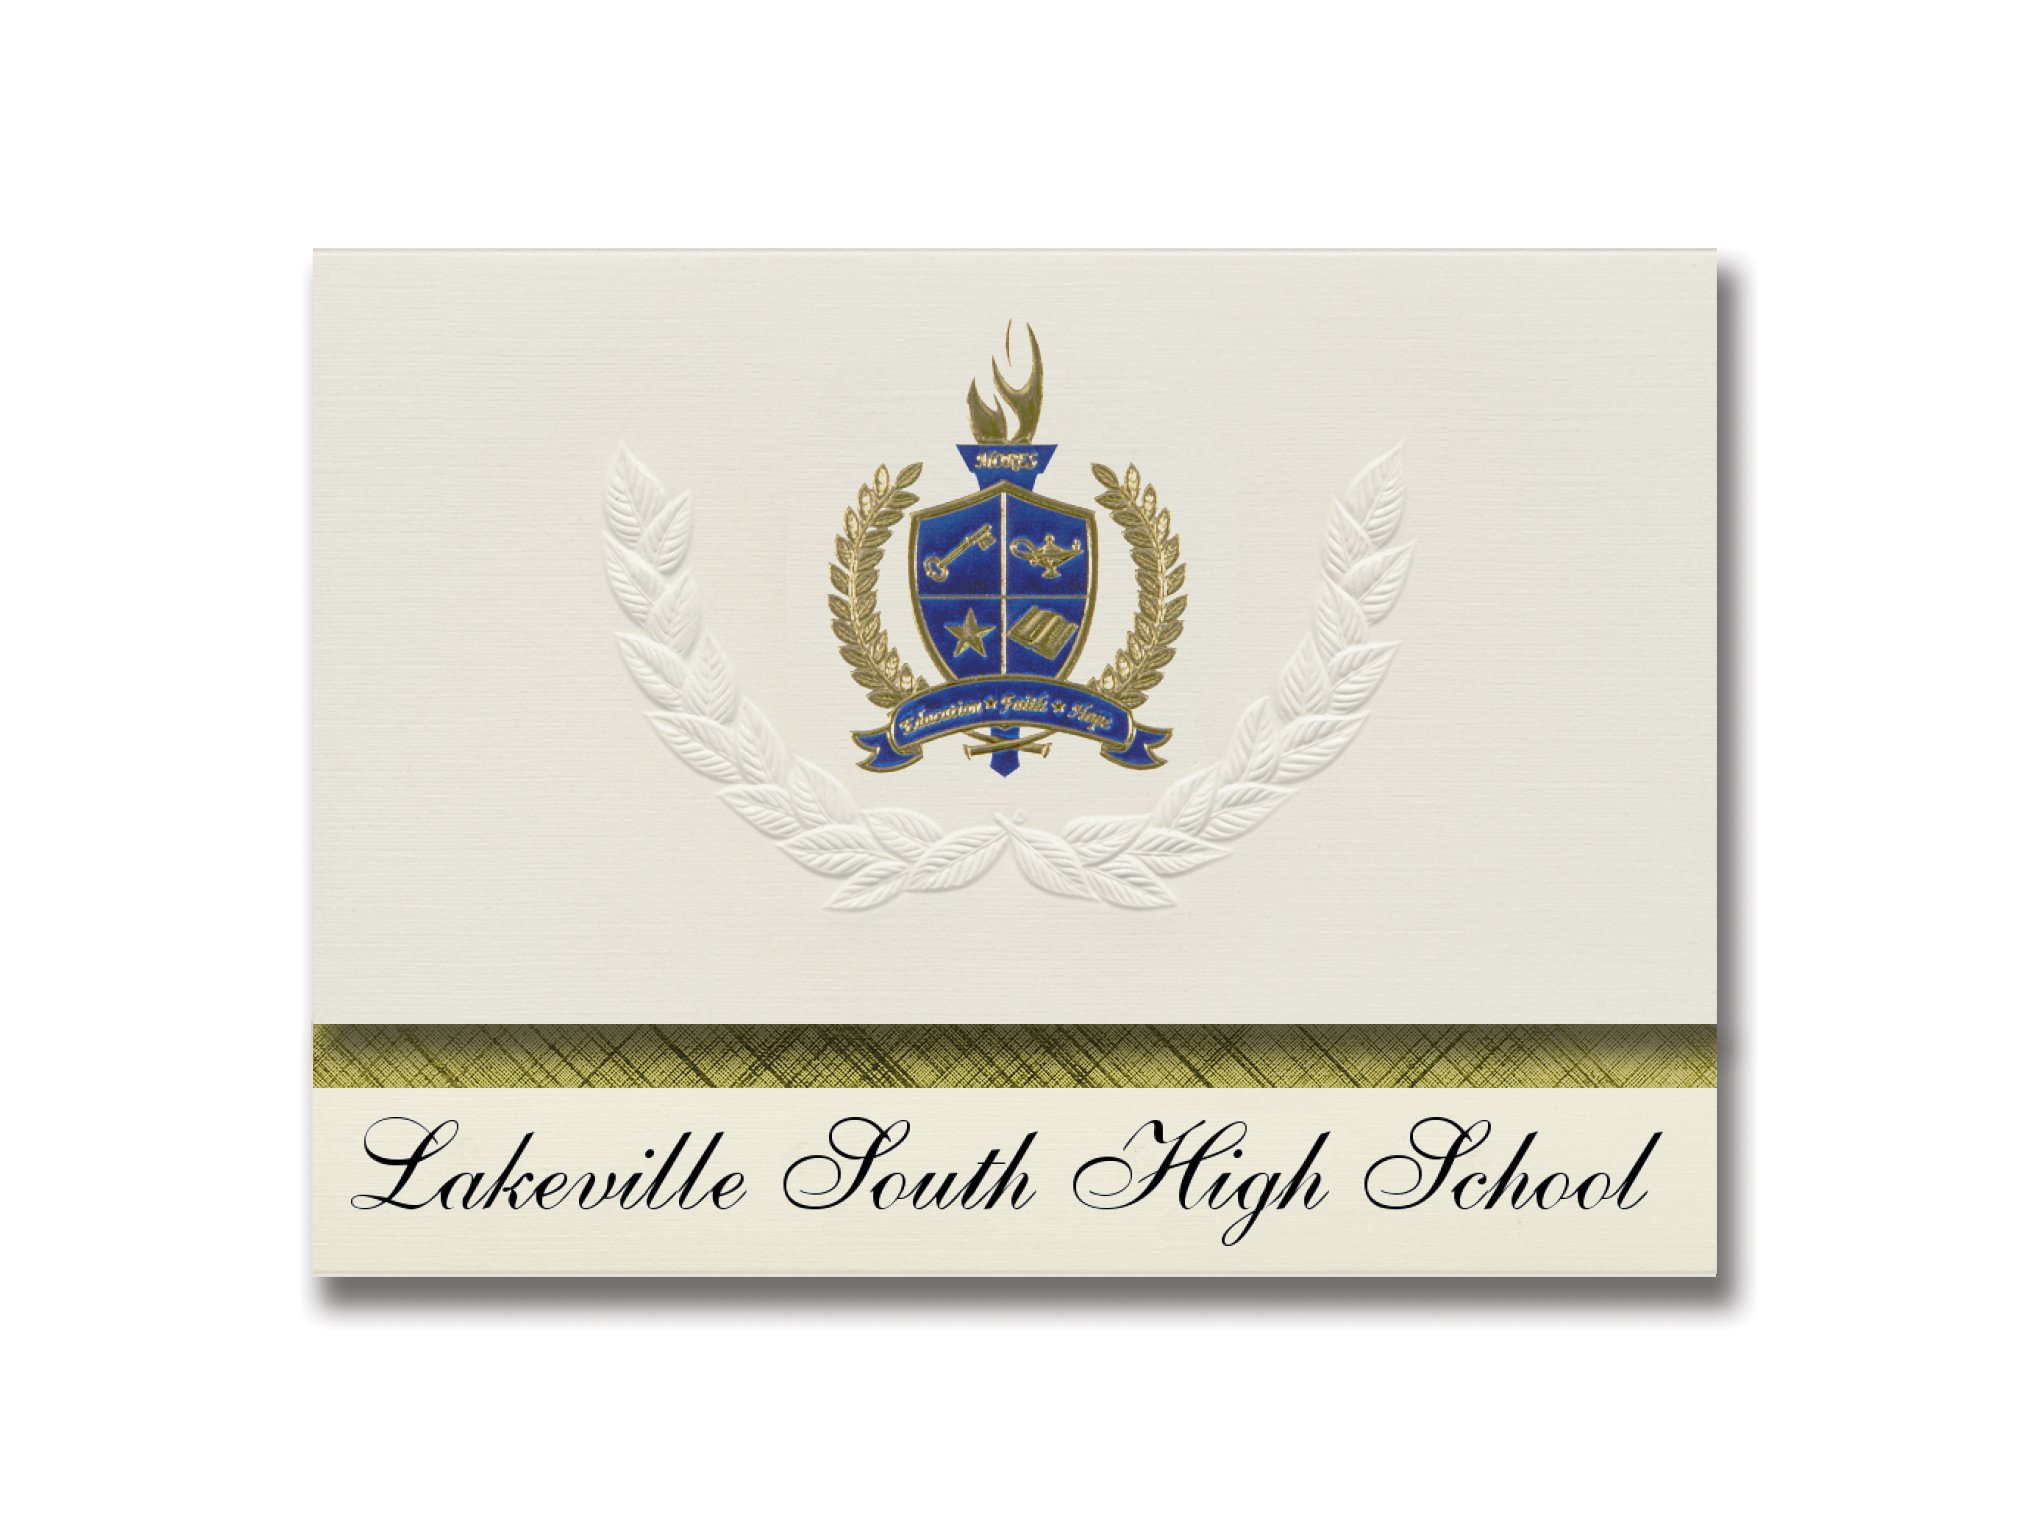 Signature Announcements Lakeville South High School (Lakeville, MN) Graduation Announcements, Presidential style, Elite package of 25 with Gold & B...